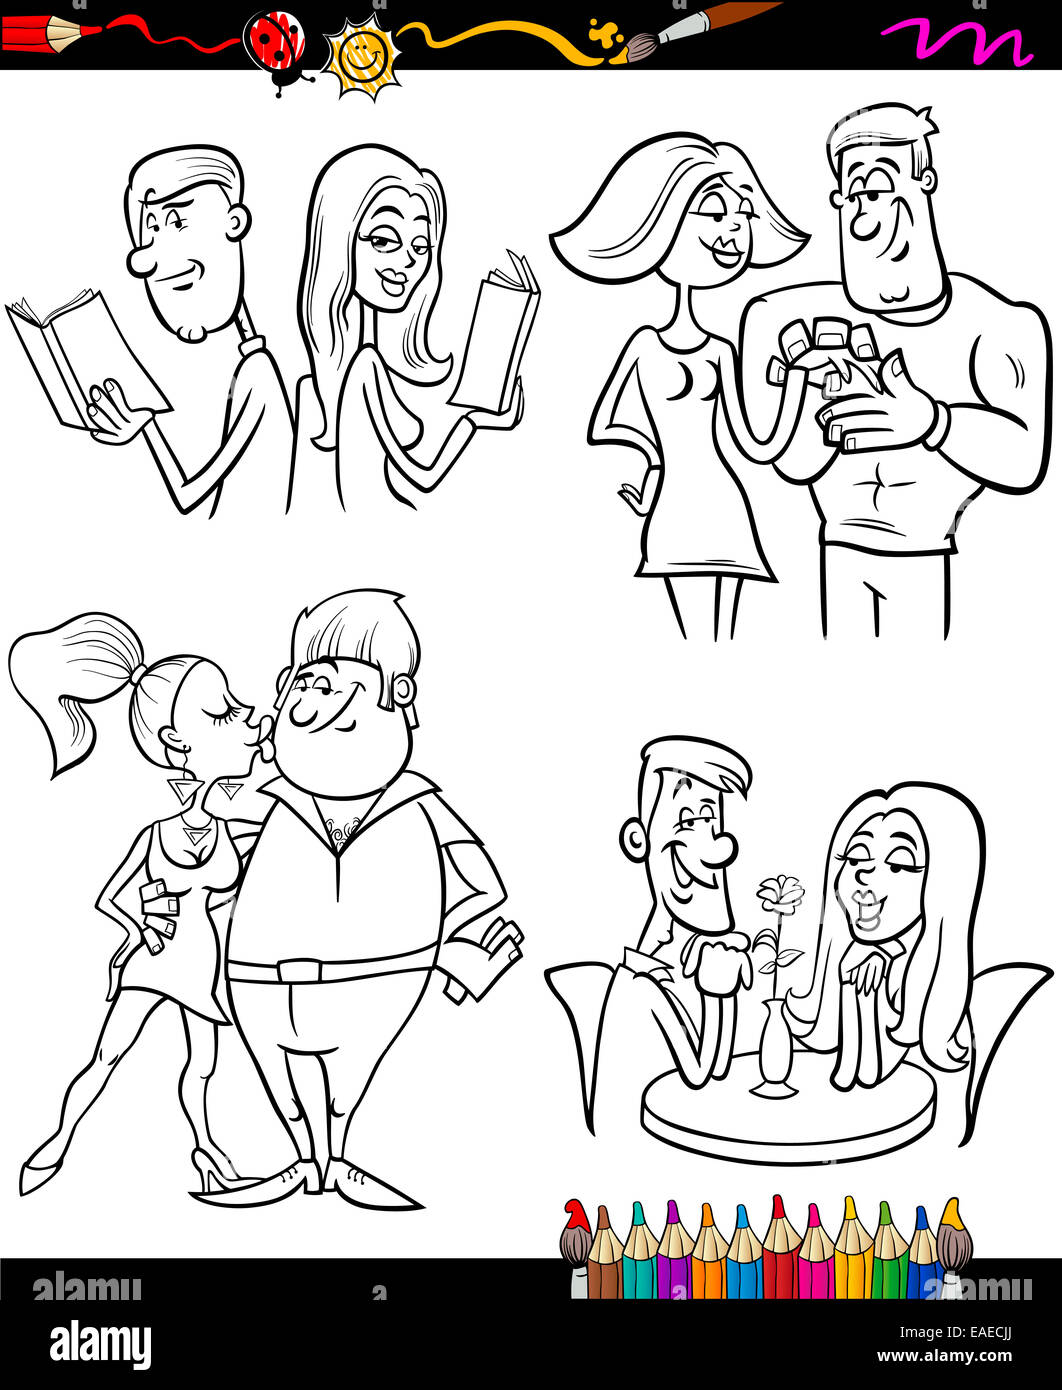 Coloring Book or Page Cartoon Illustration of Color and Black and White Happy Couples in Love Stock Photo